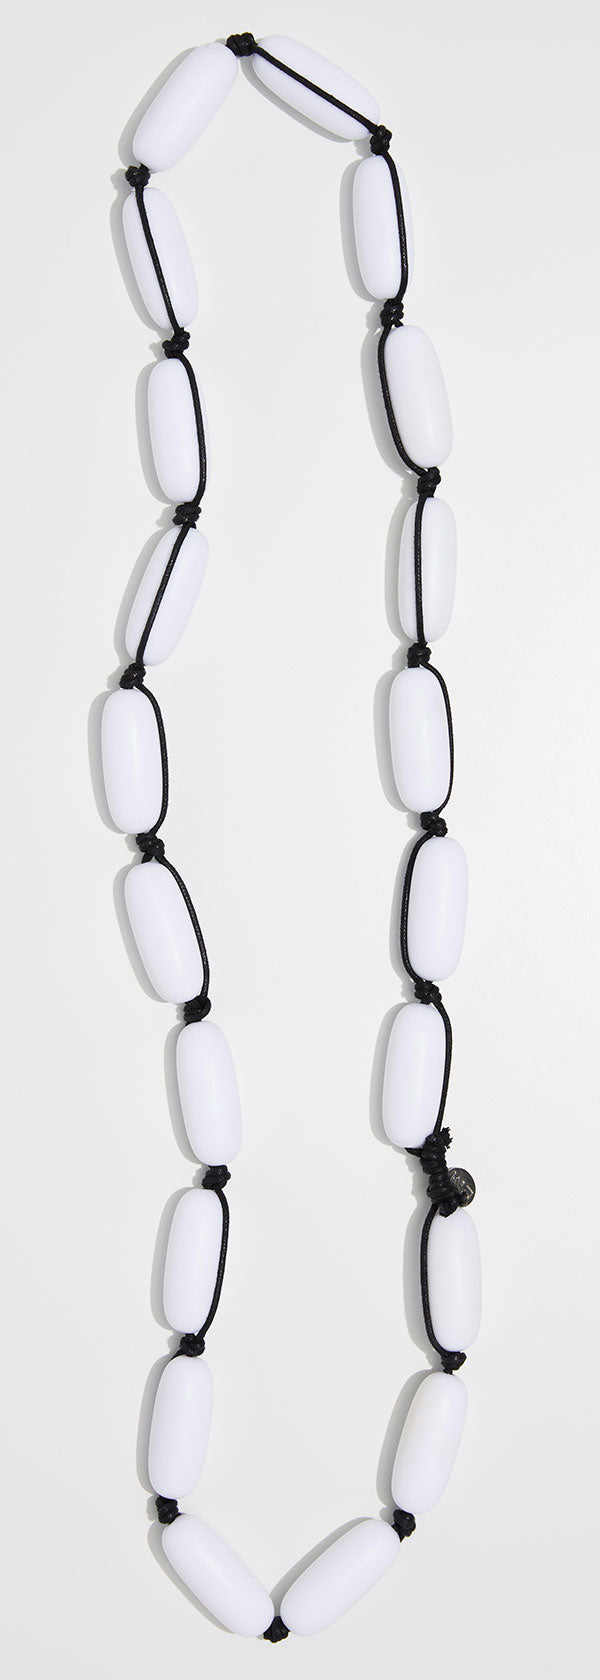 Evie Marques Original necklace Marshmallow on black cord